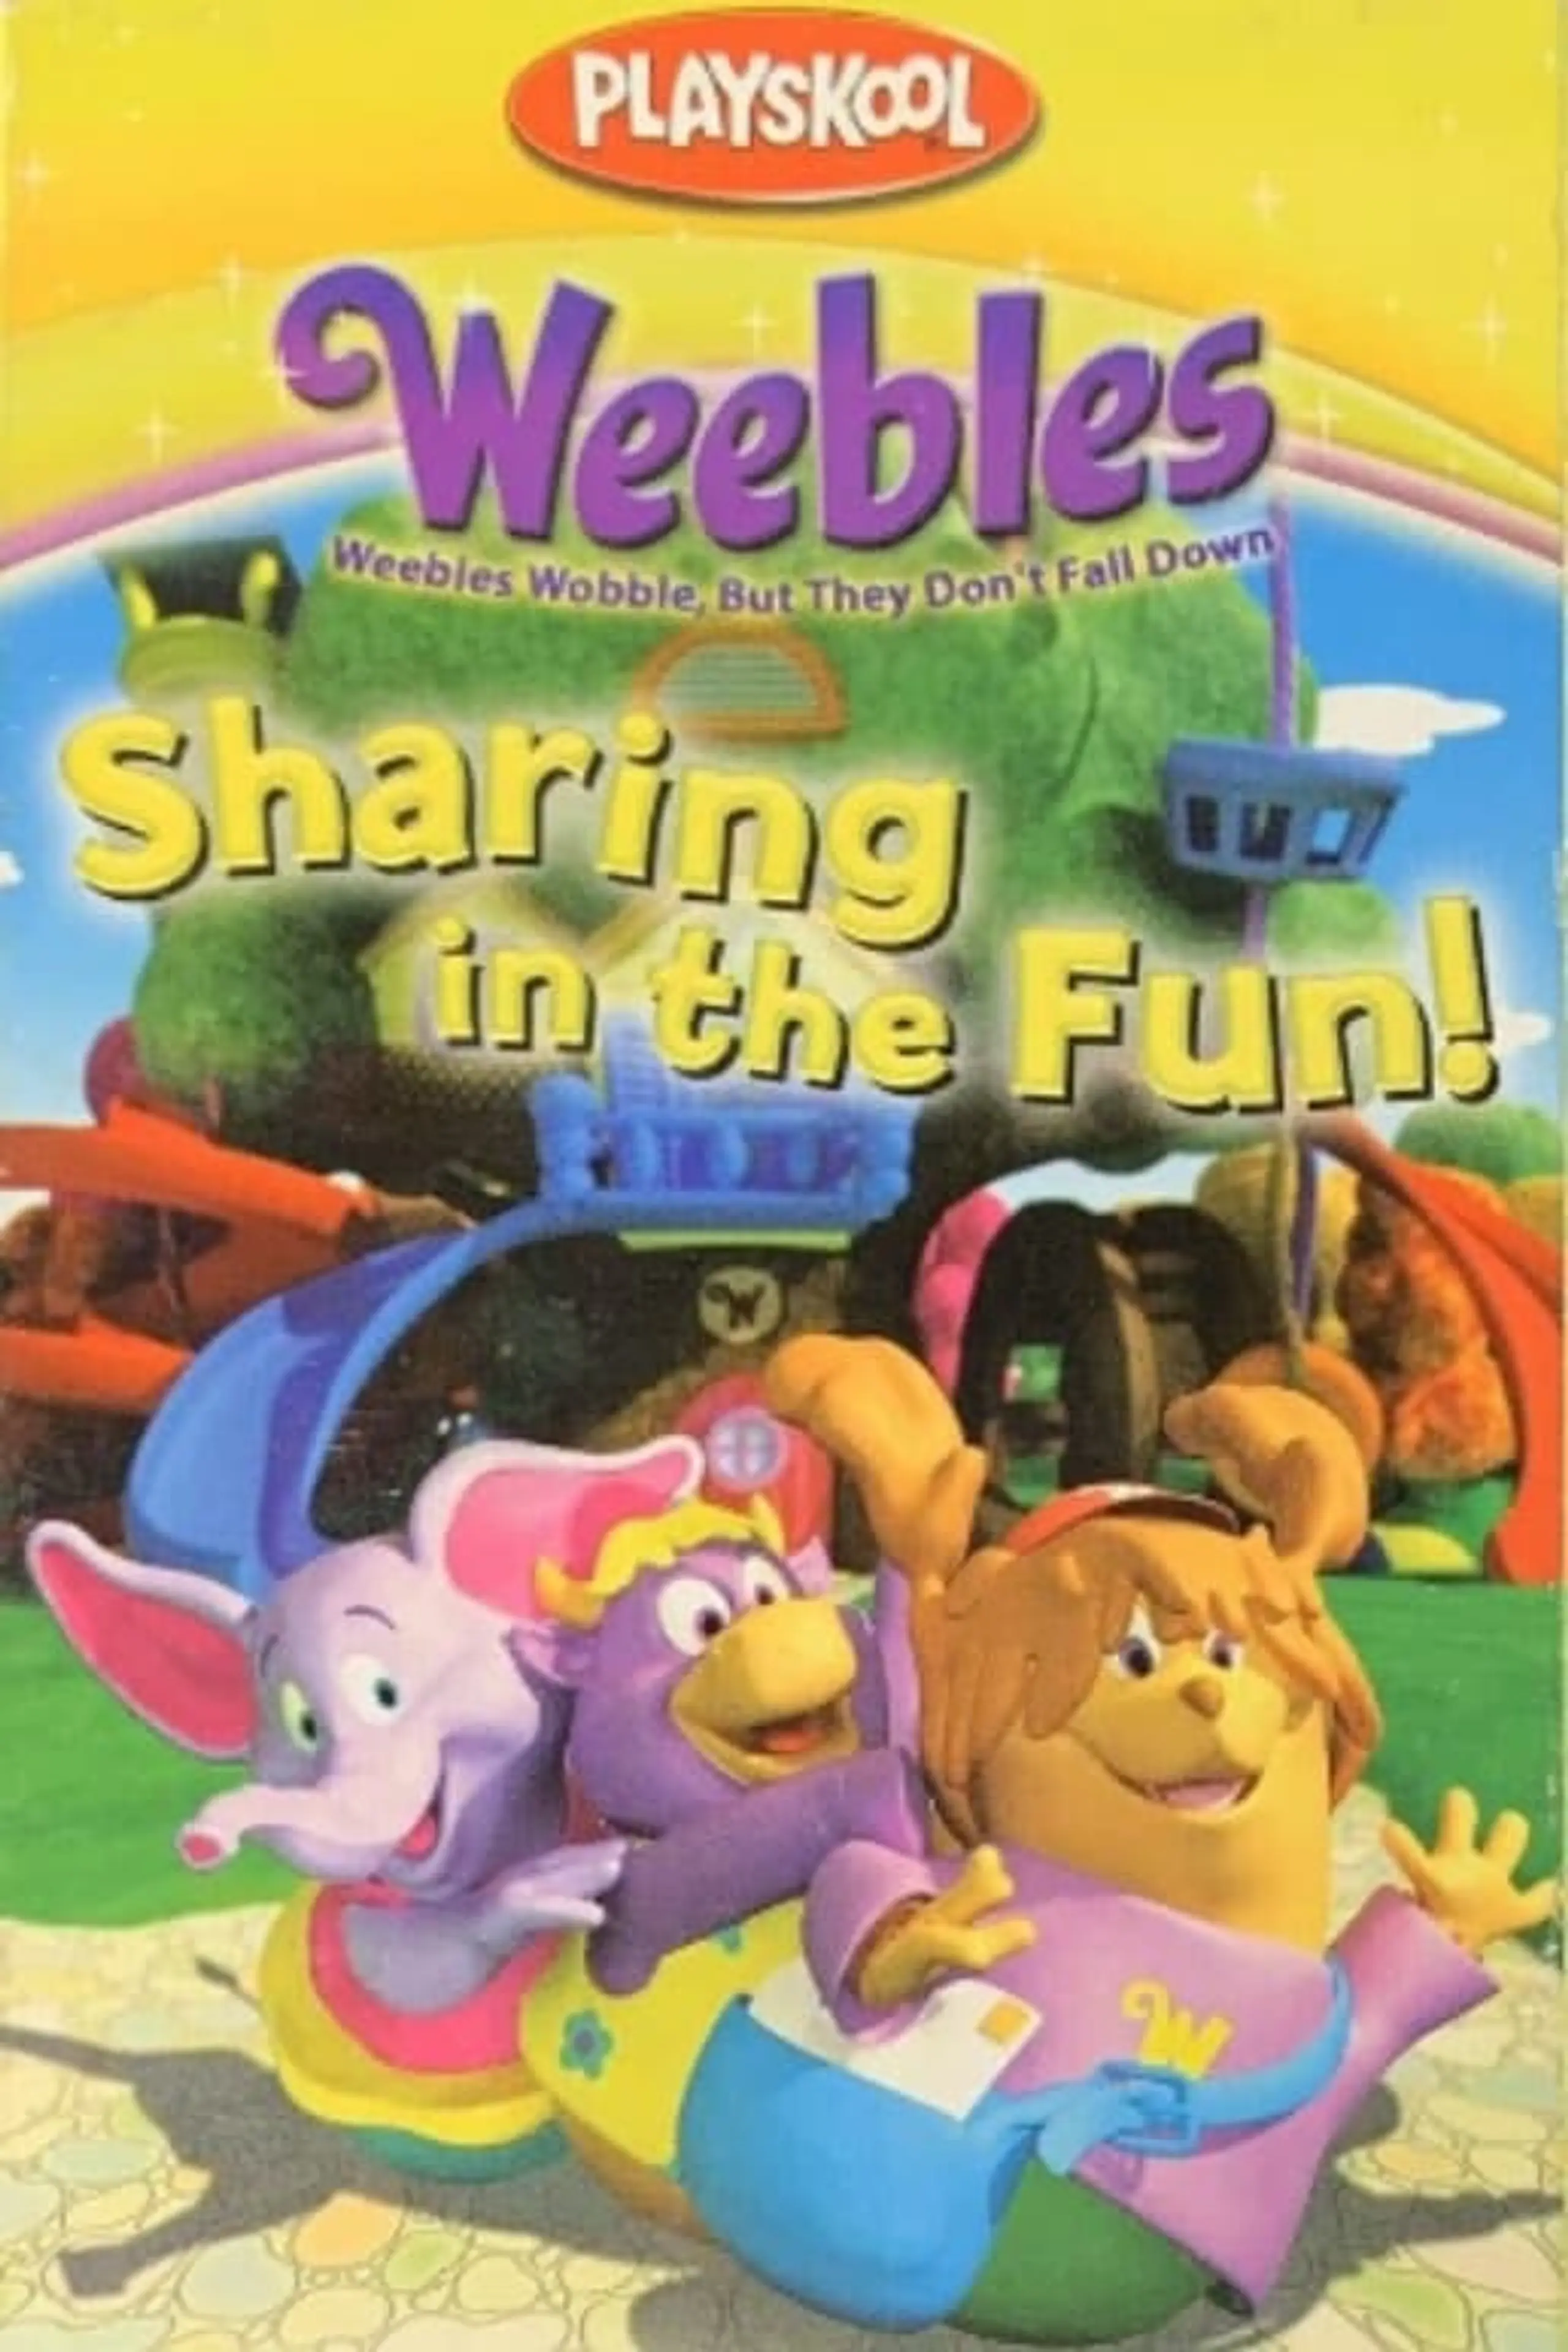 Weebles: Sharing in the Fun